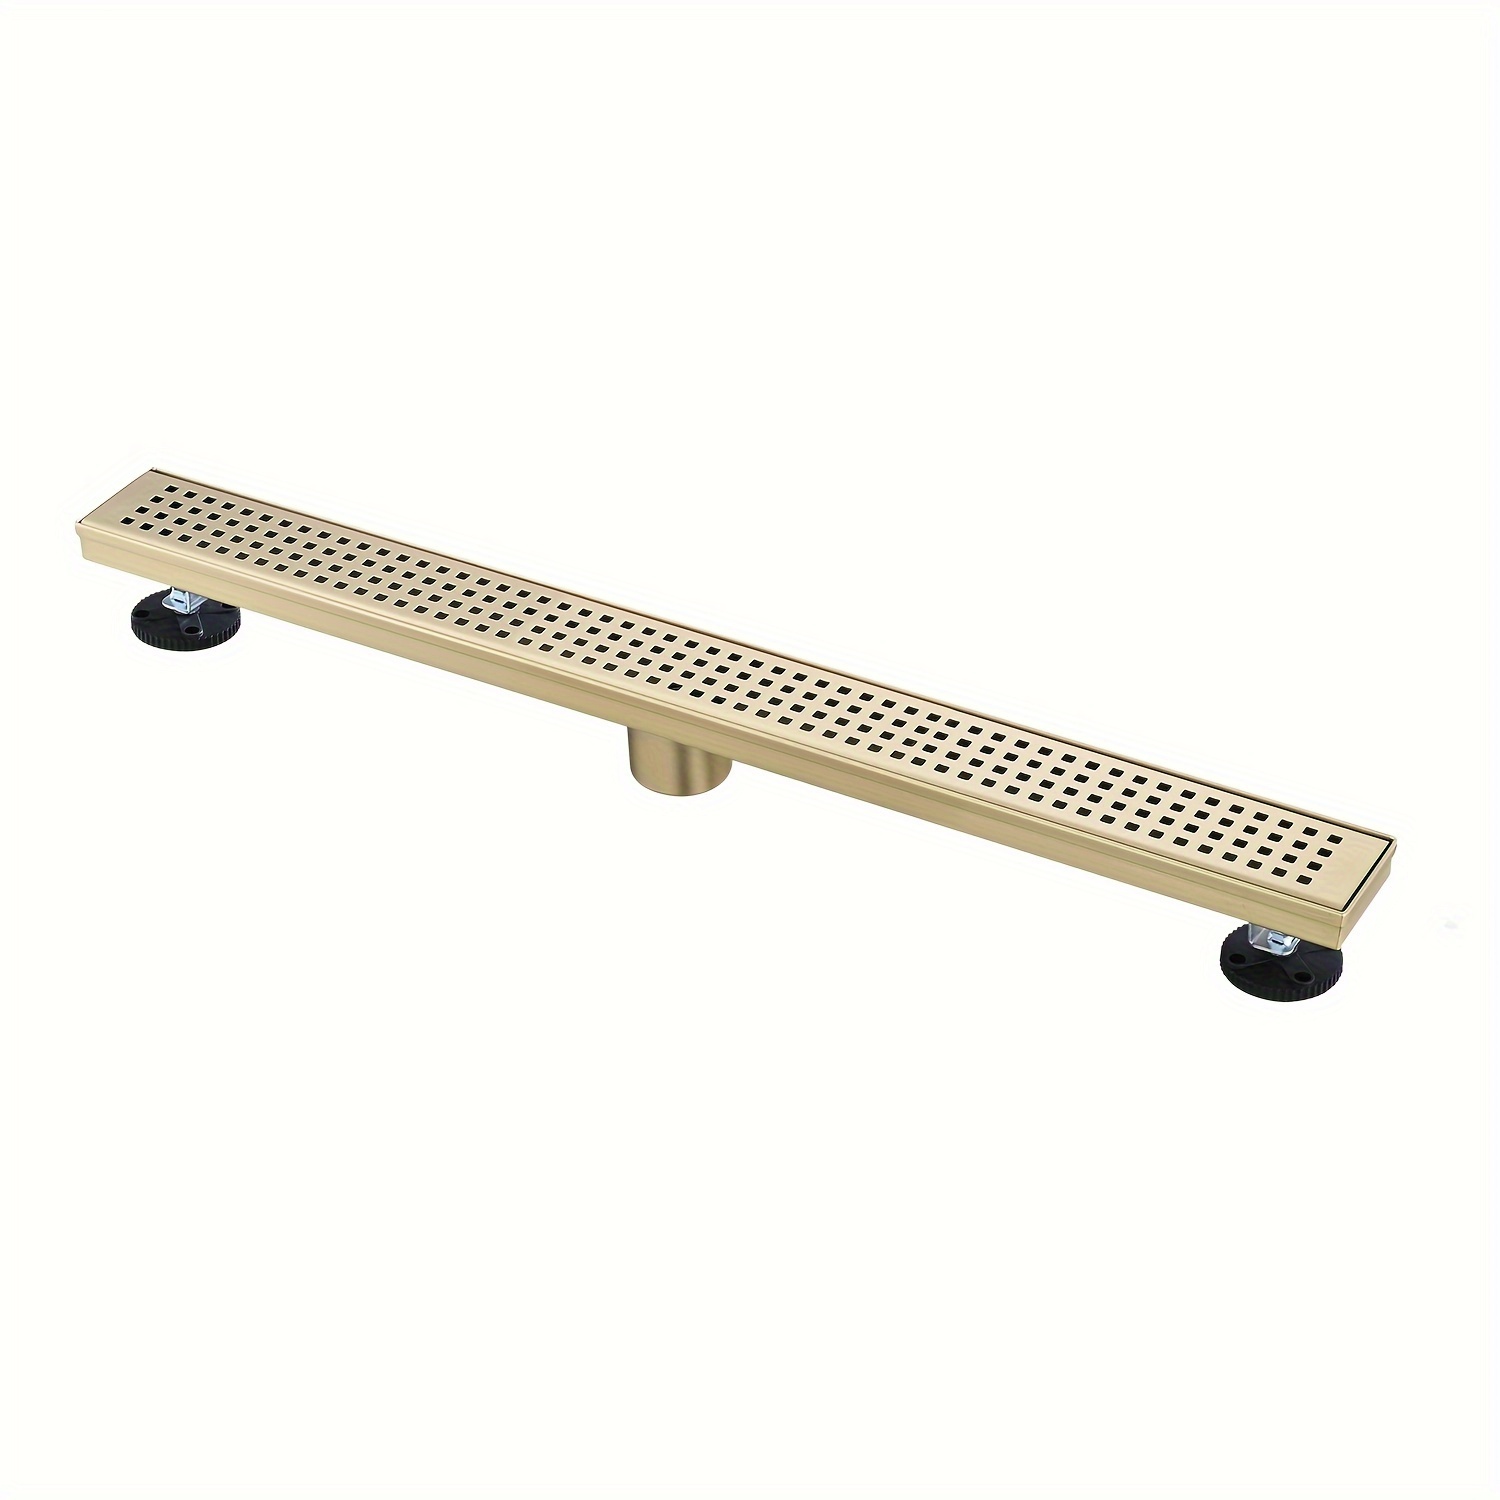 

1pc 24 Inch Brushed Gold Shower Linear Drain, With Removable Square Hole Pattern Cover Grate, Stainless Steel Fast Drainage Floor Linear Drain Include Adjustable Feet, Hair Strainer